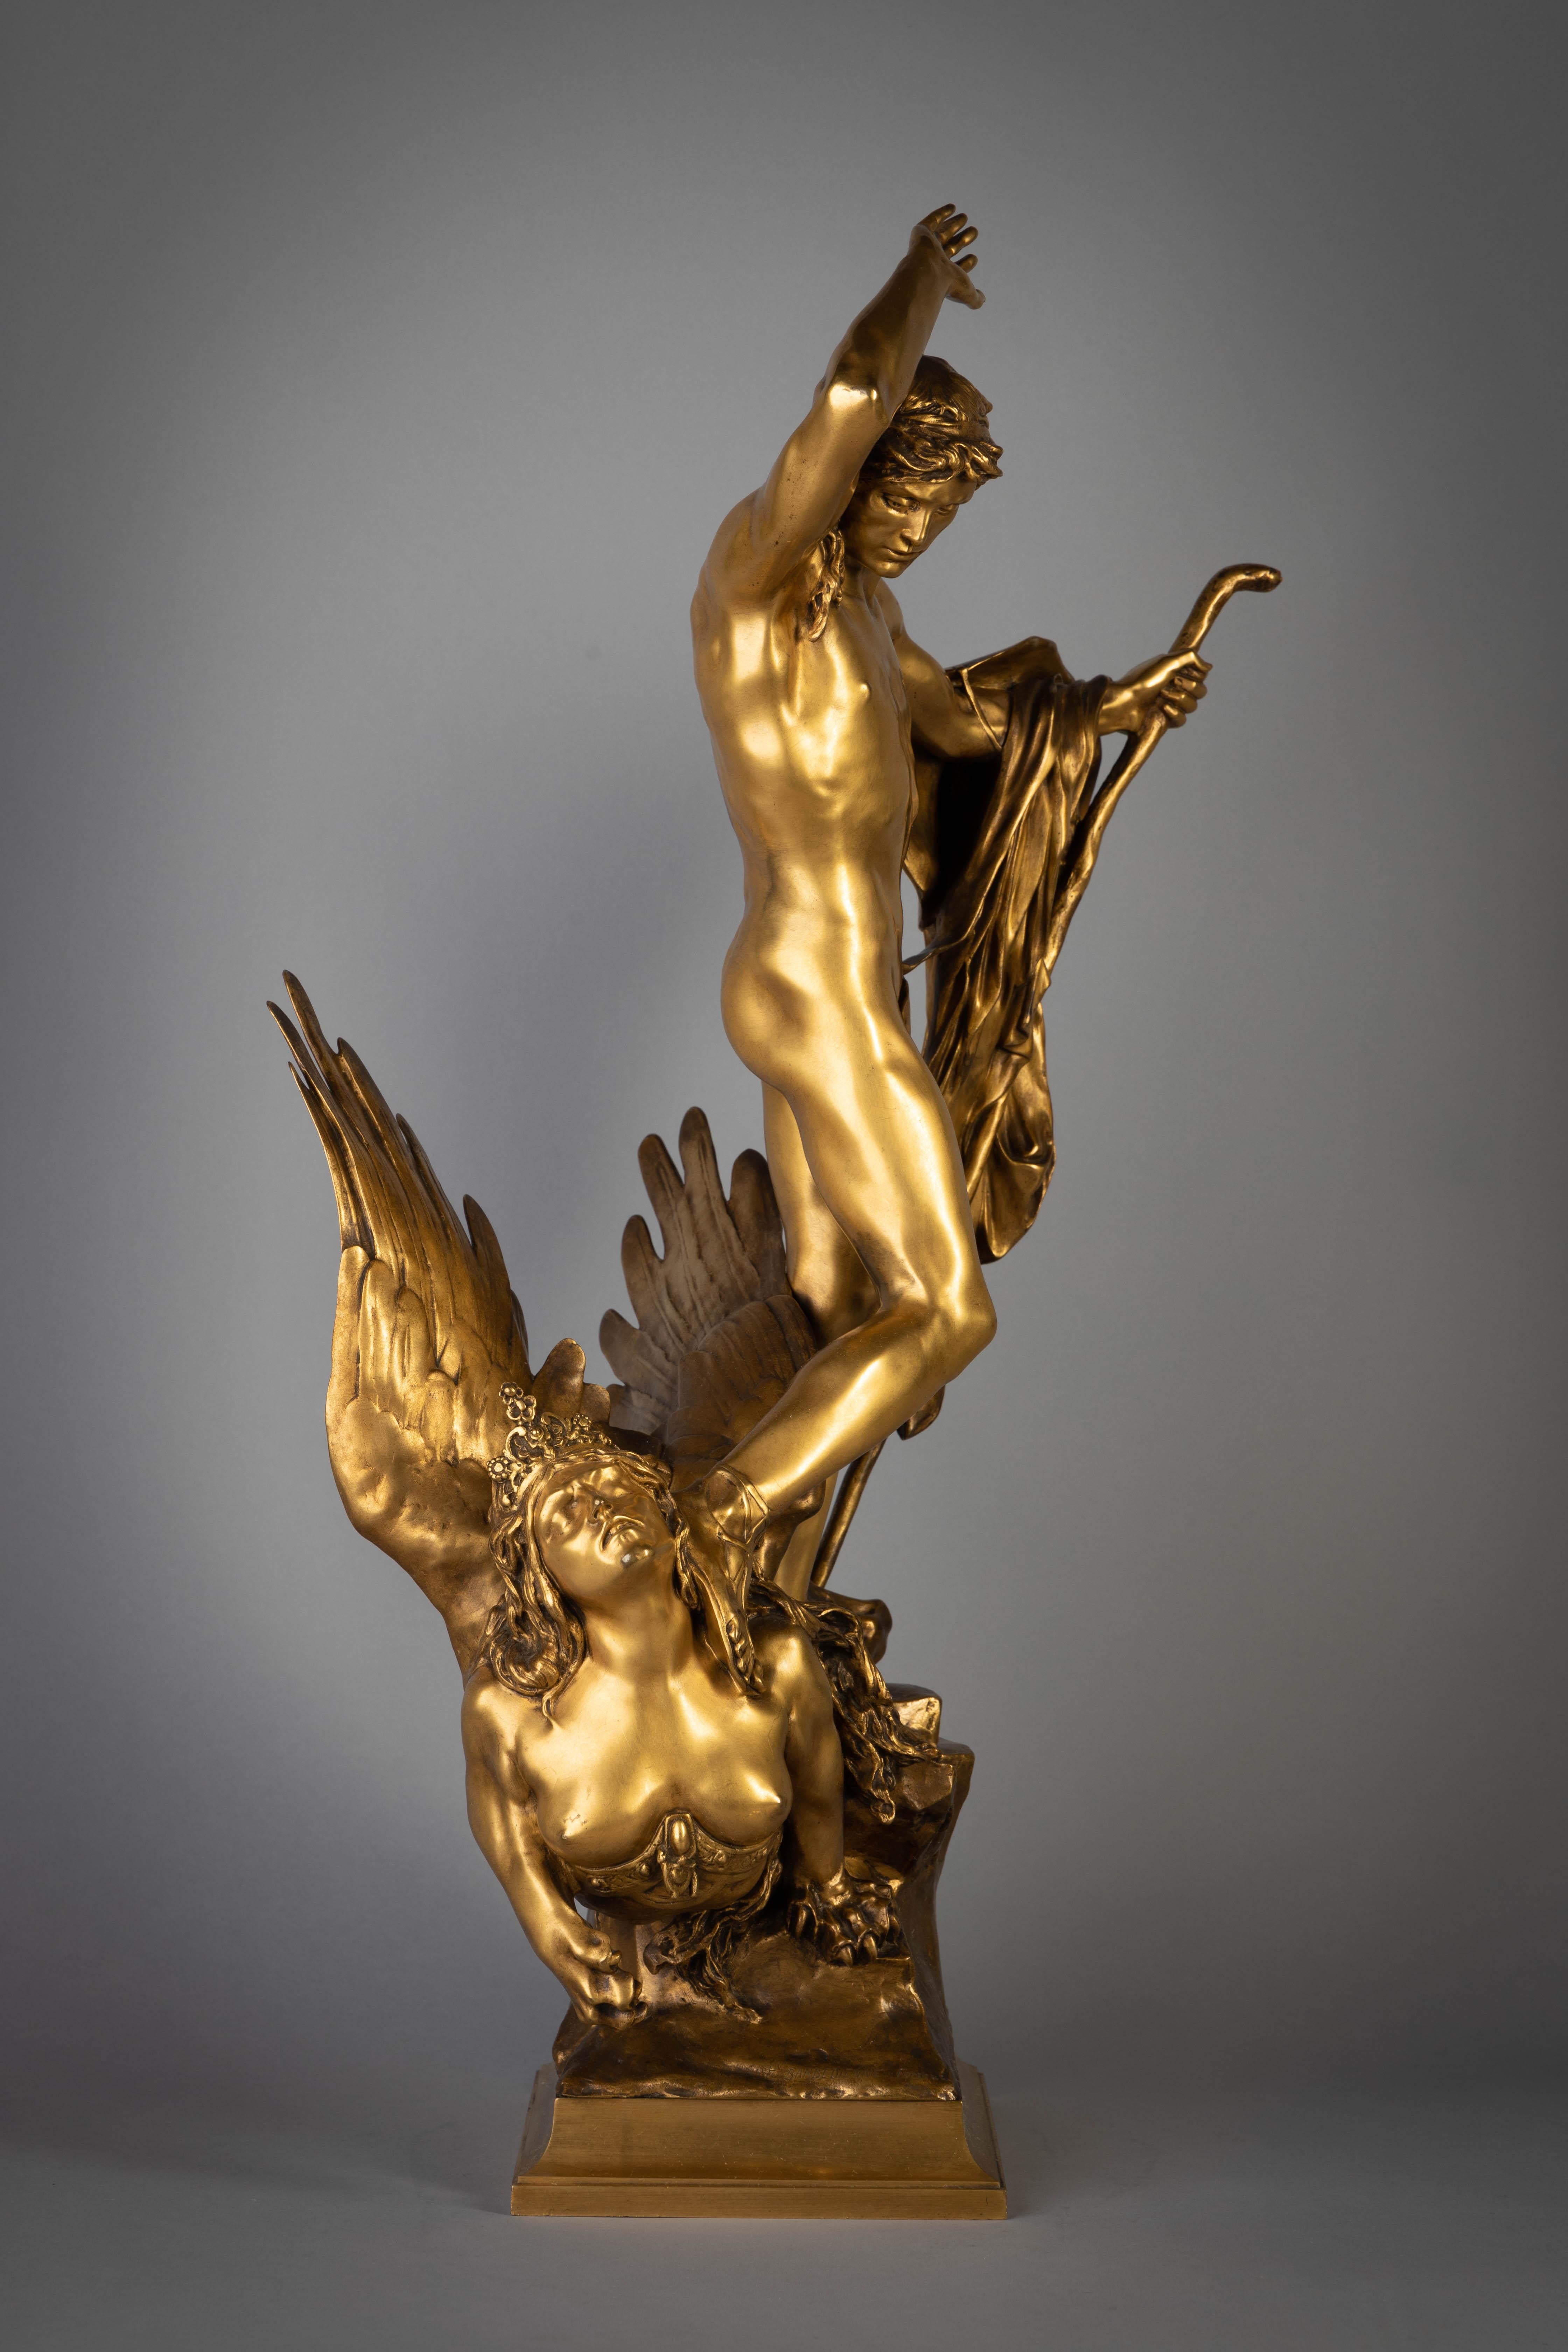 Another cast without gilt is in the Musee D'orsay. The work was also edited in Biscuit by Sevres. Sicard studied under Barrias and Felix Laurent. He won Prix de Rome in 1891 and a Gold Medal at Exposition Universelle in 1900. Signed and stamped F.